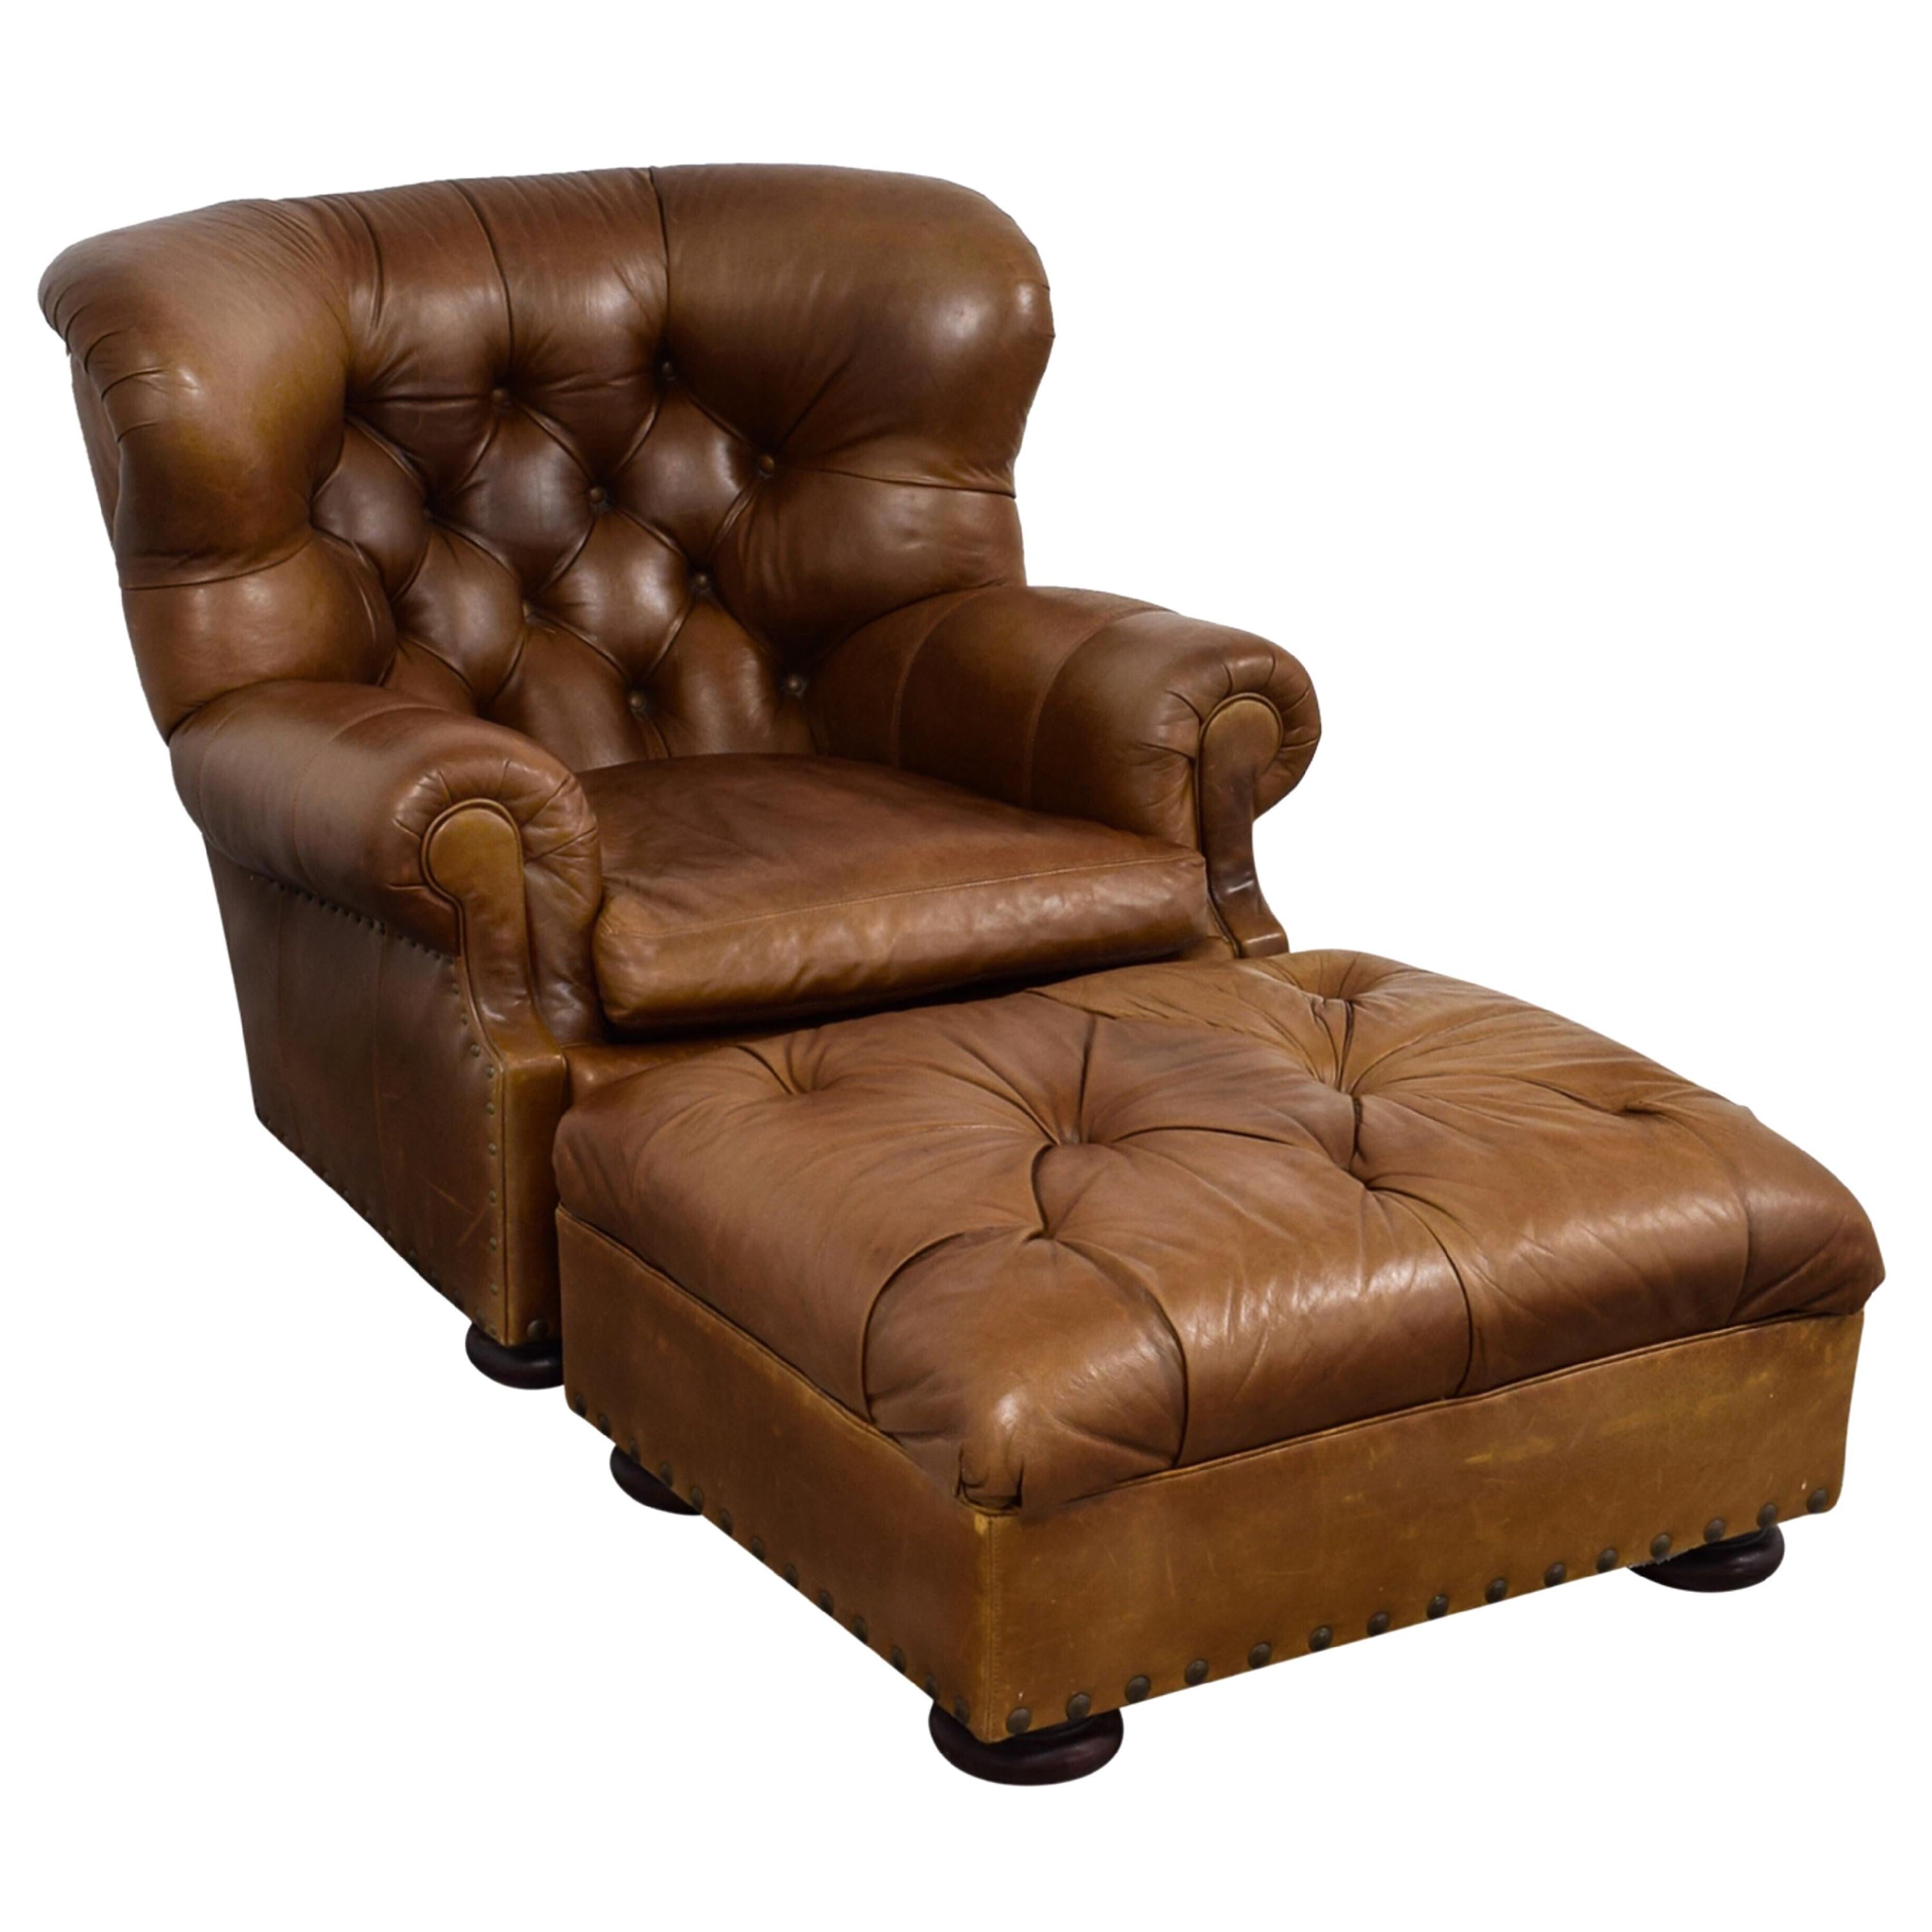 Ralph Lauren Writer's Chestnut Brown Leather Wingback Armchair and Ottoman Set